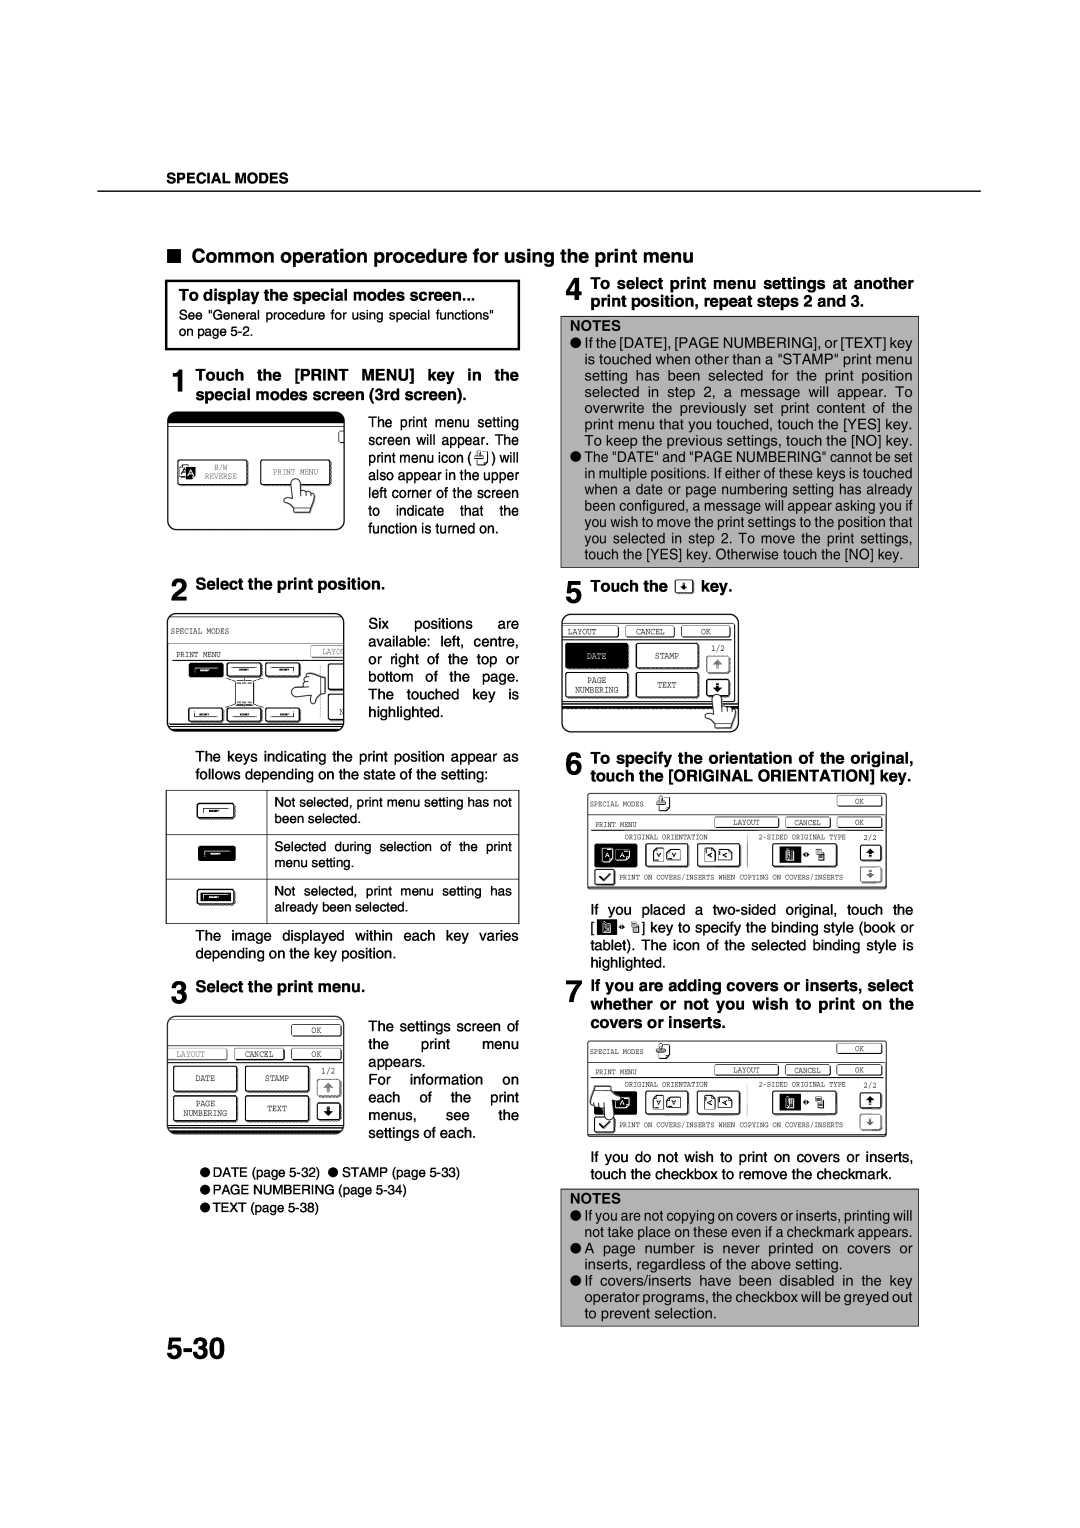 Sharp AR-M451N 5-30, Common operation procedure for using the print menu, To display the special modes screen 